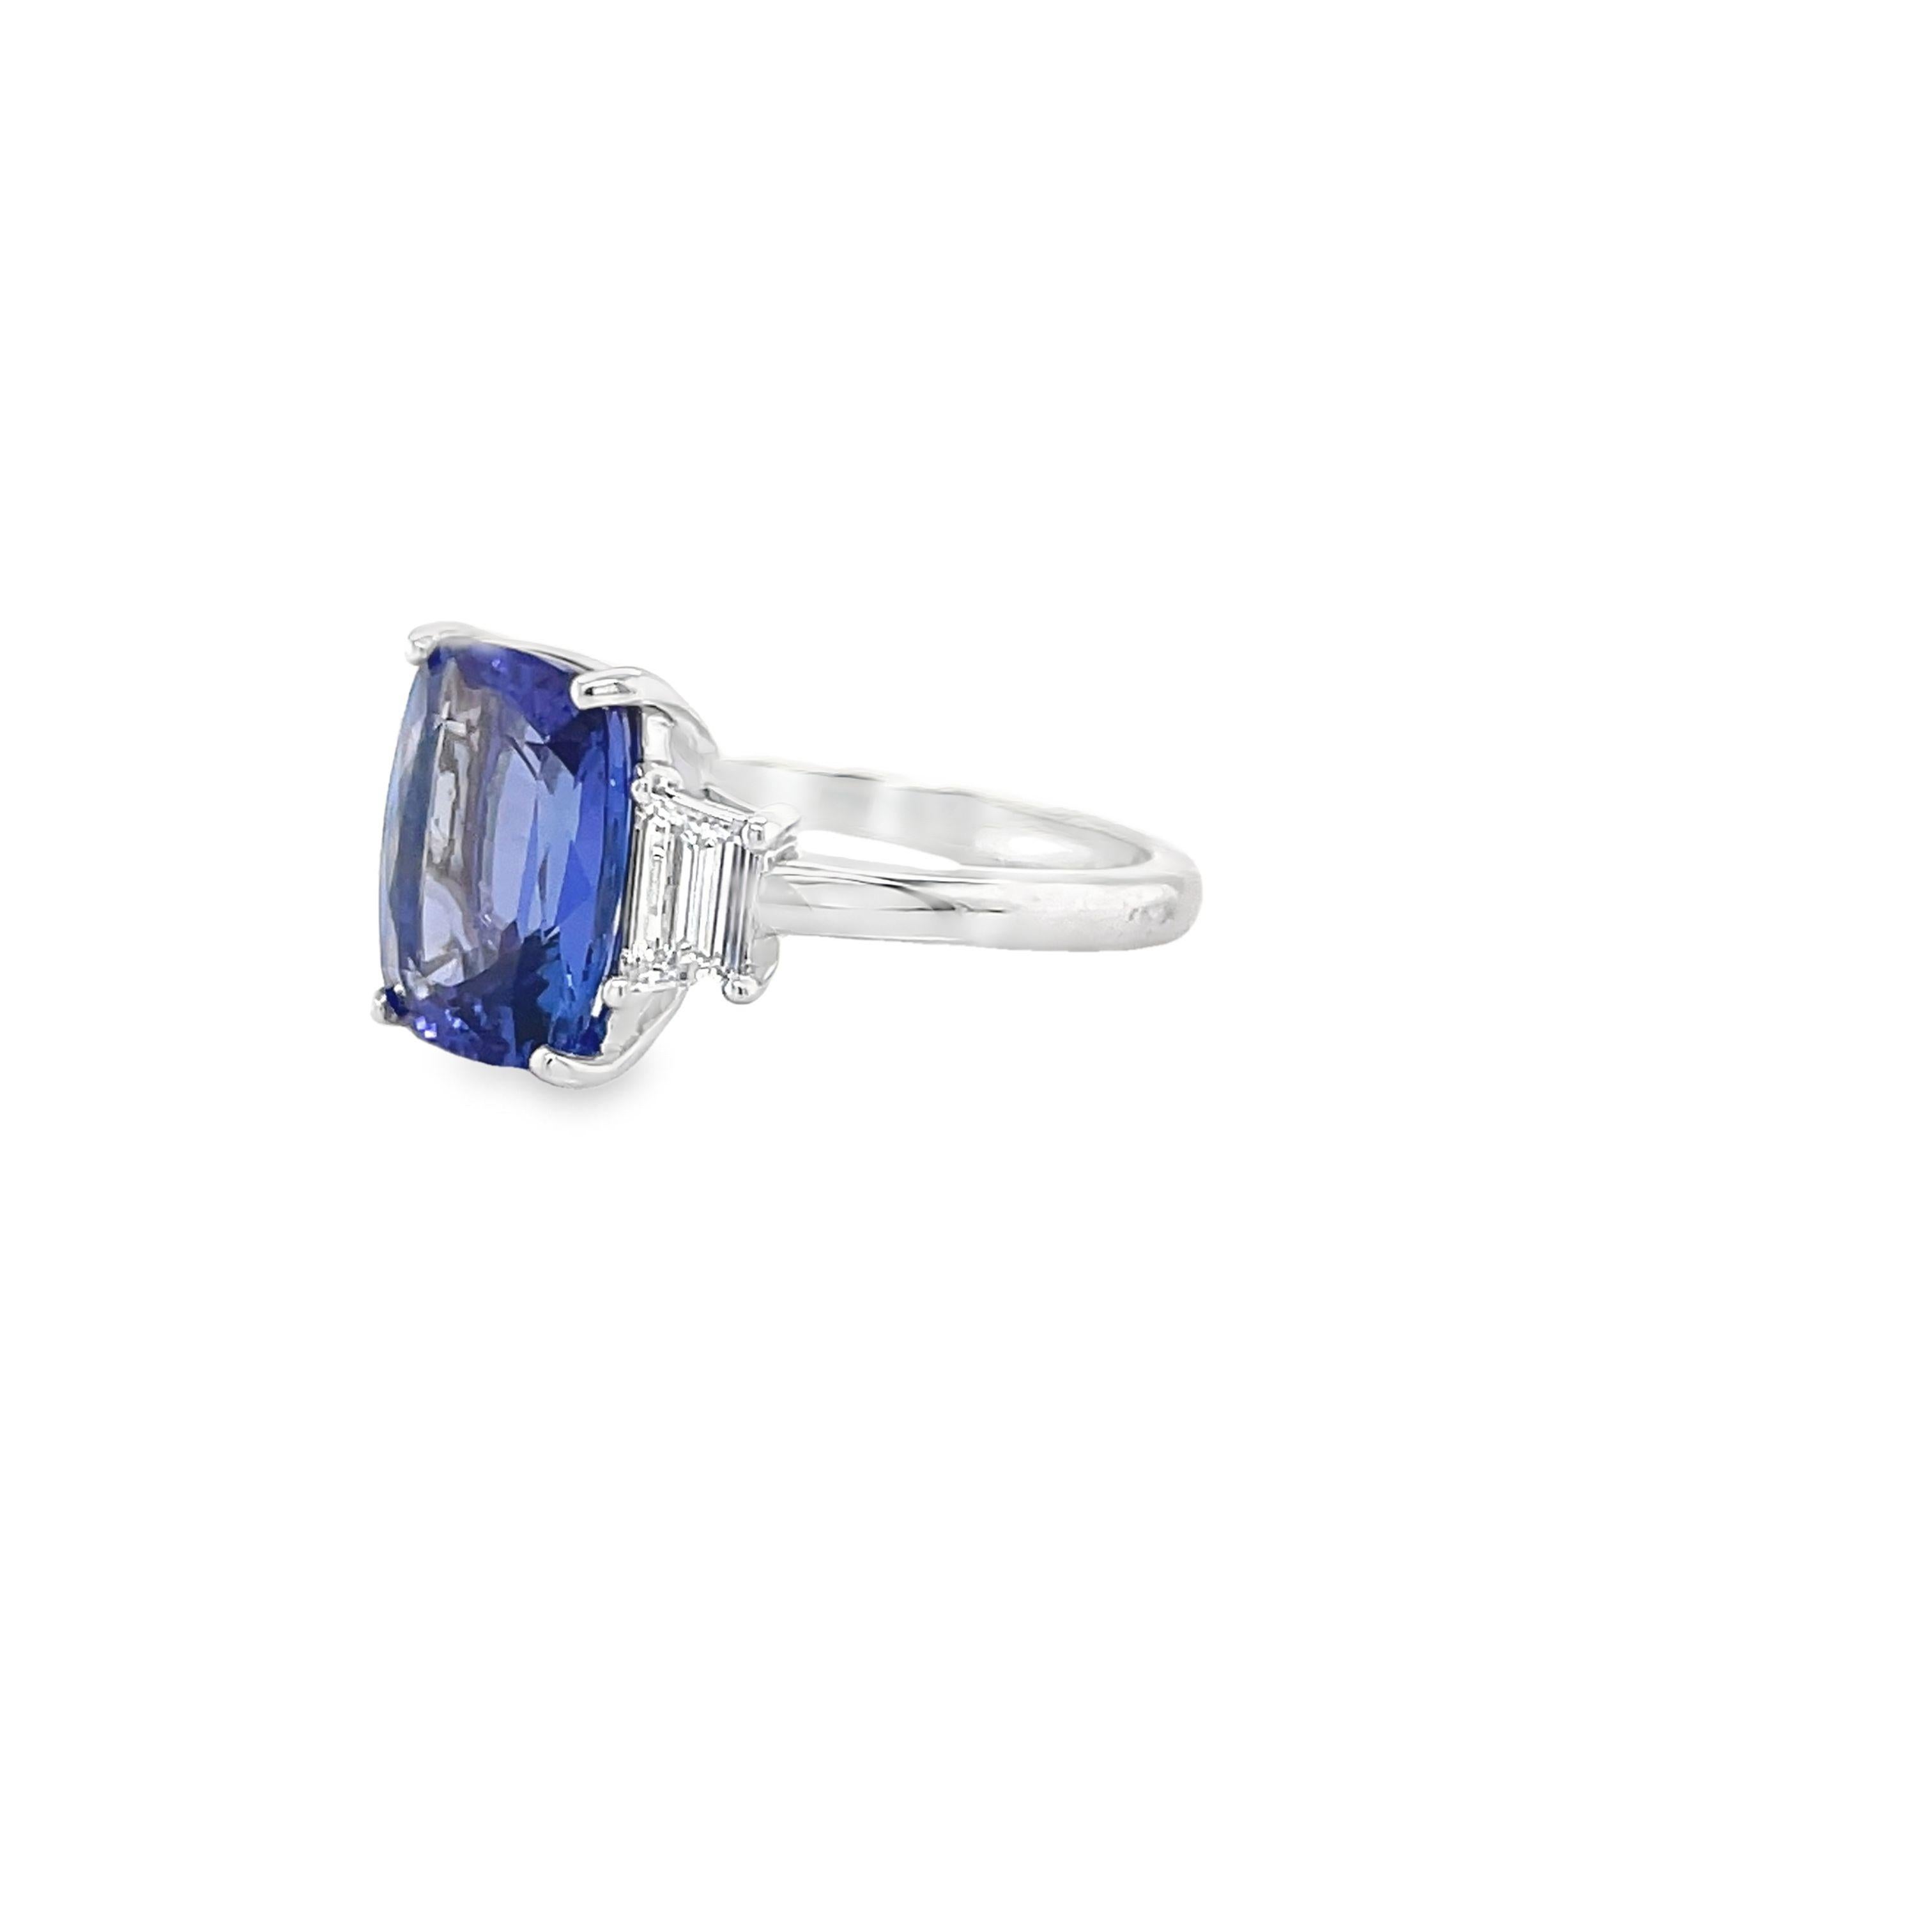 Ring contains one center elongated cushion cut tanzanite, 4.28ct and two matched side stone step cut trapezoids, 0.43tcw. Diamonds are F in color and VS2 in clarity. All stones are mounted in handmade basket prong settings and a 2mm solid shank.